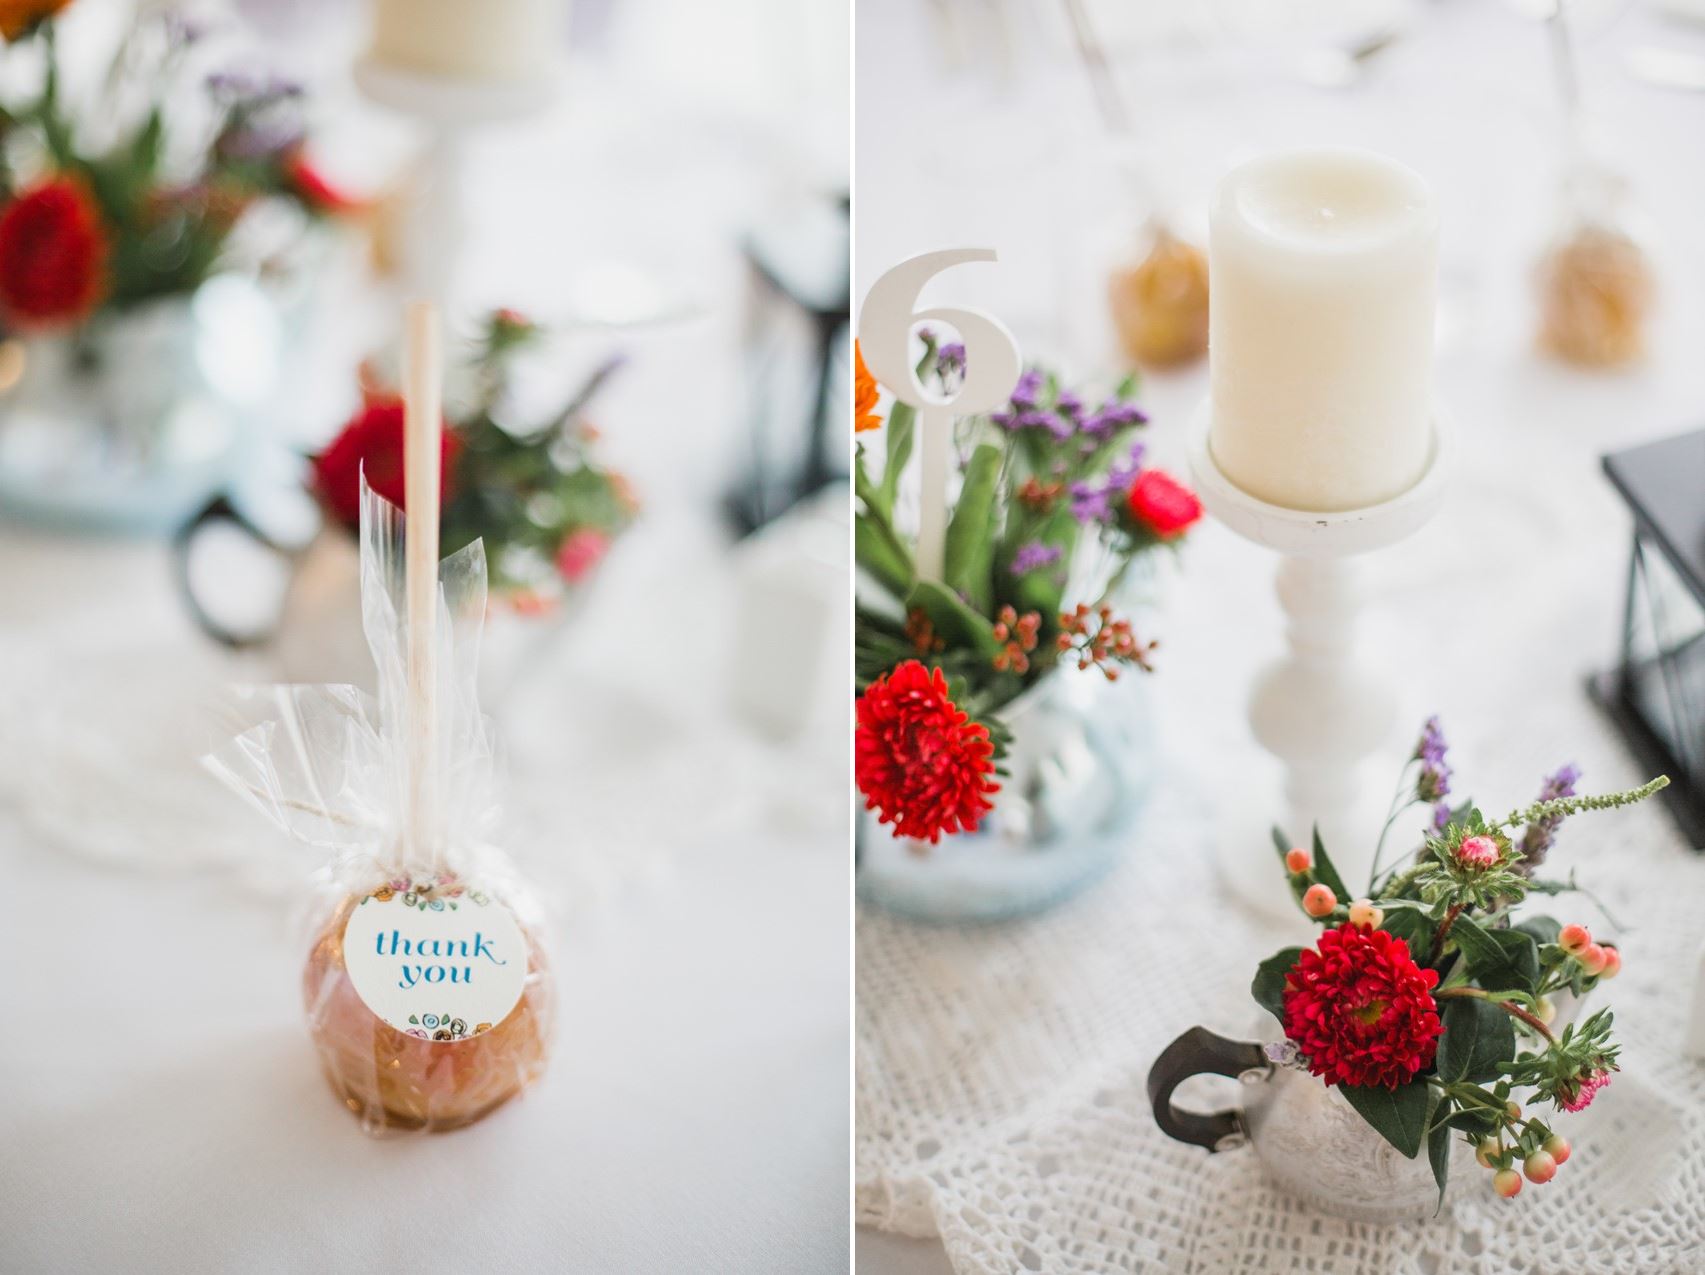 DIY wedding favours - toffee apples